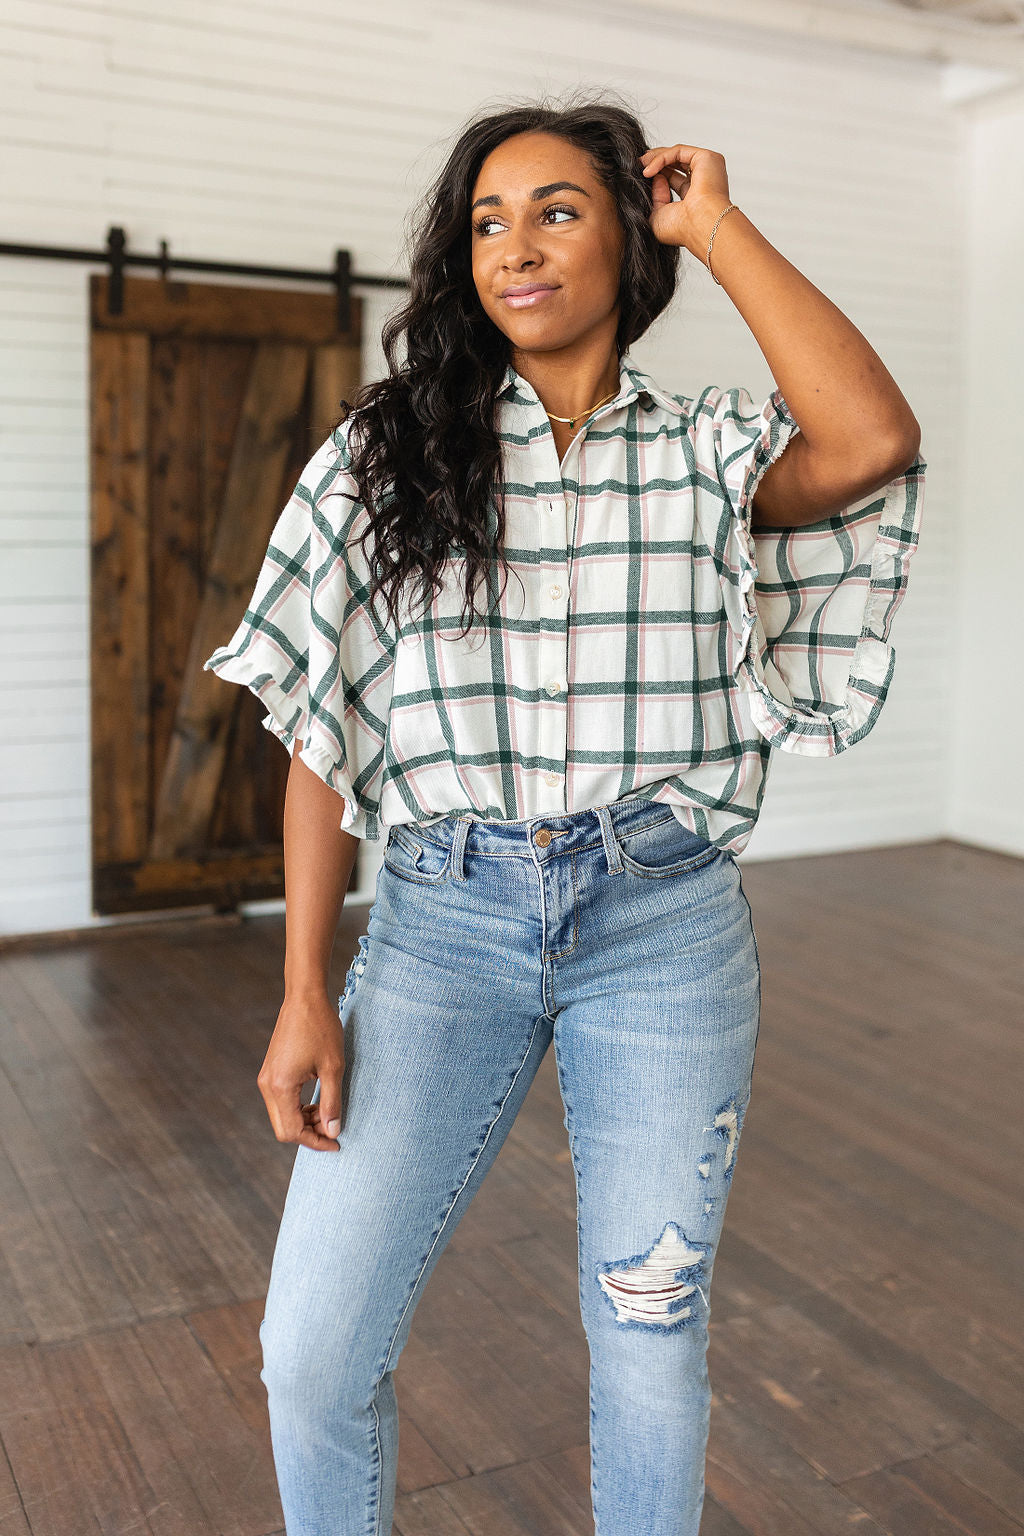 Perfect Picnic Plaid Top-Long Sleeve Tops-Inspired by Justeen-Women's Clothing Boutique in Chicago, Illinois